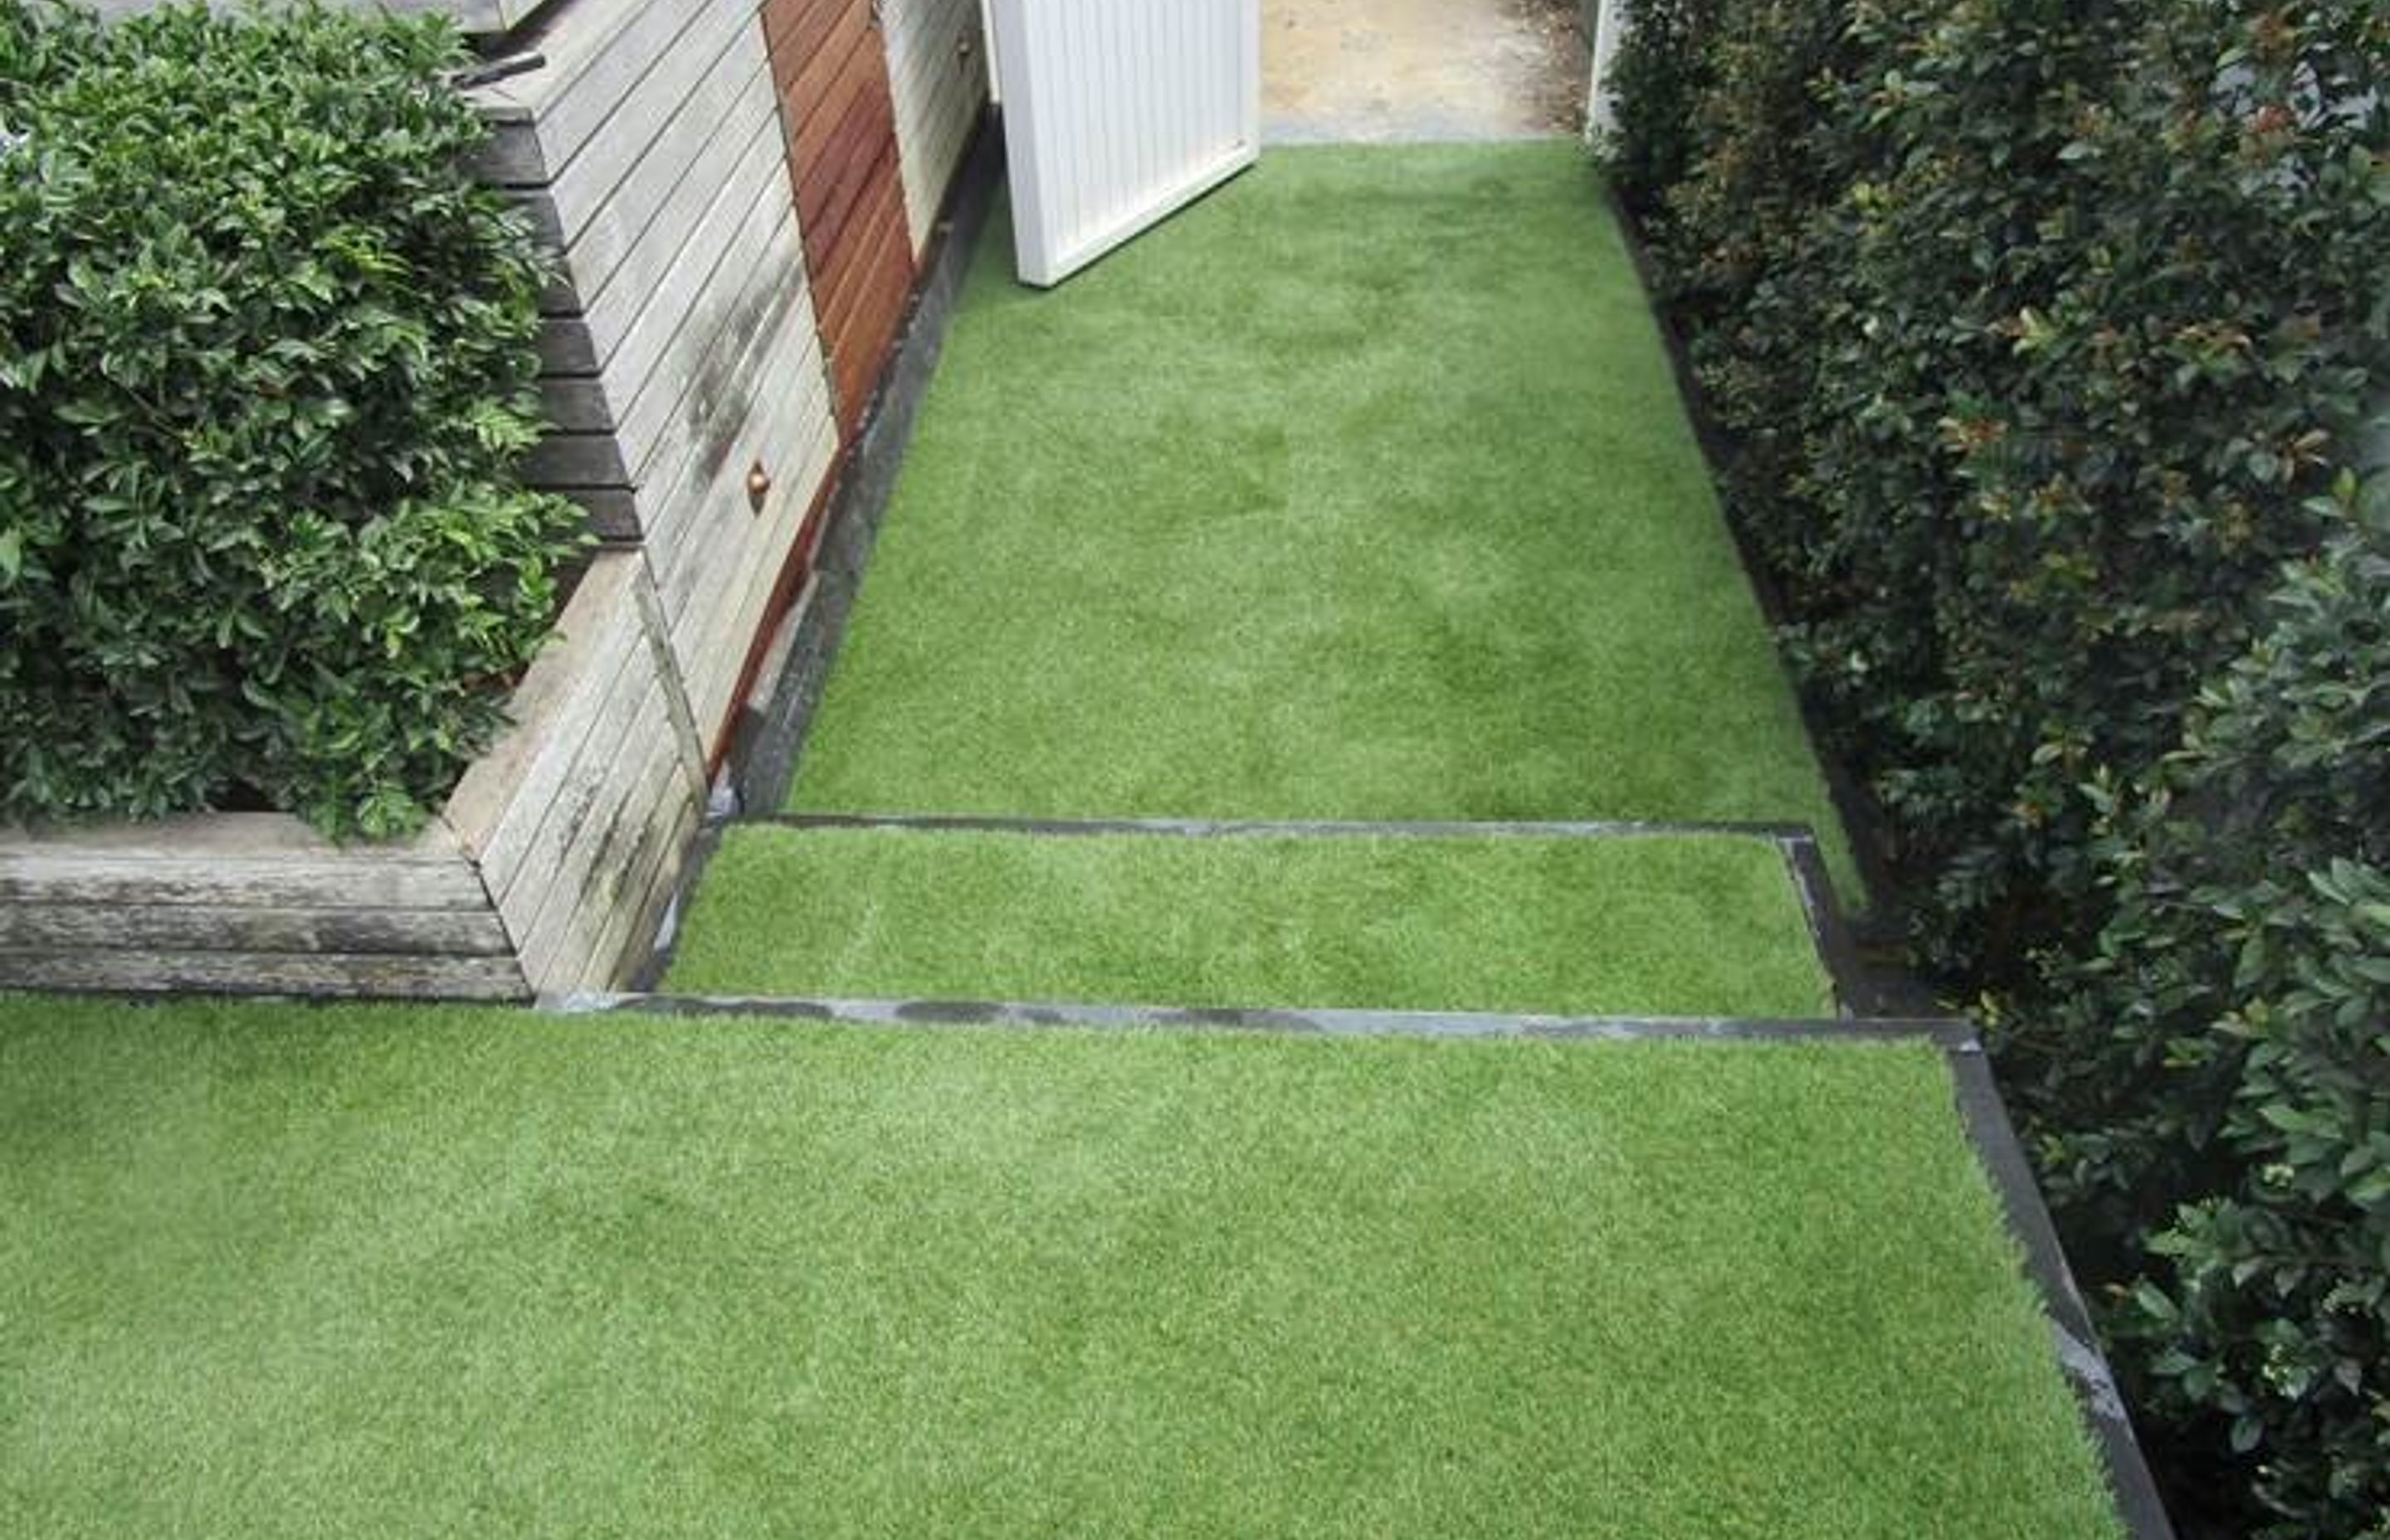 TigerTurf Serenity 30 lawn completes your space and brings you lasting benefits